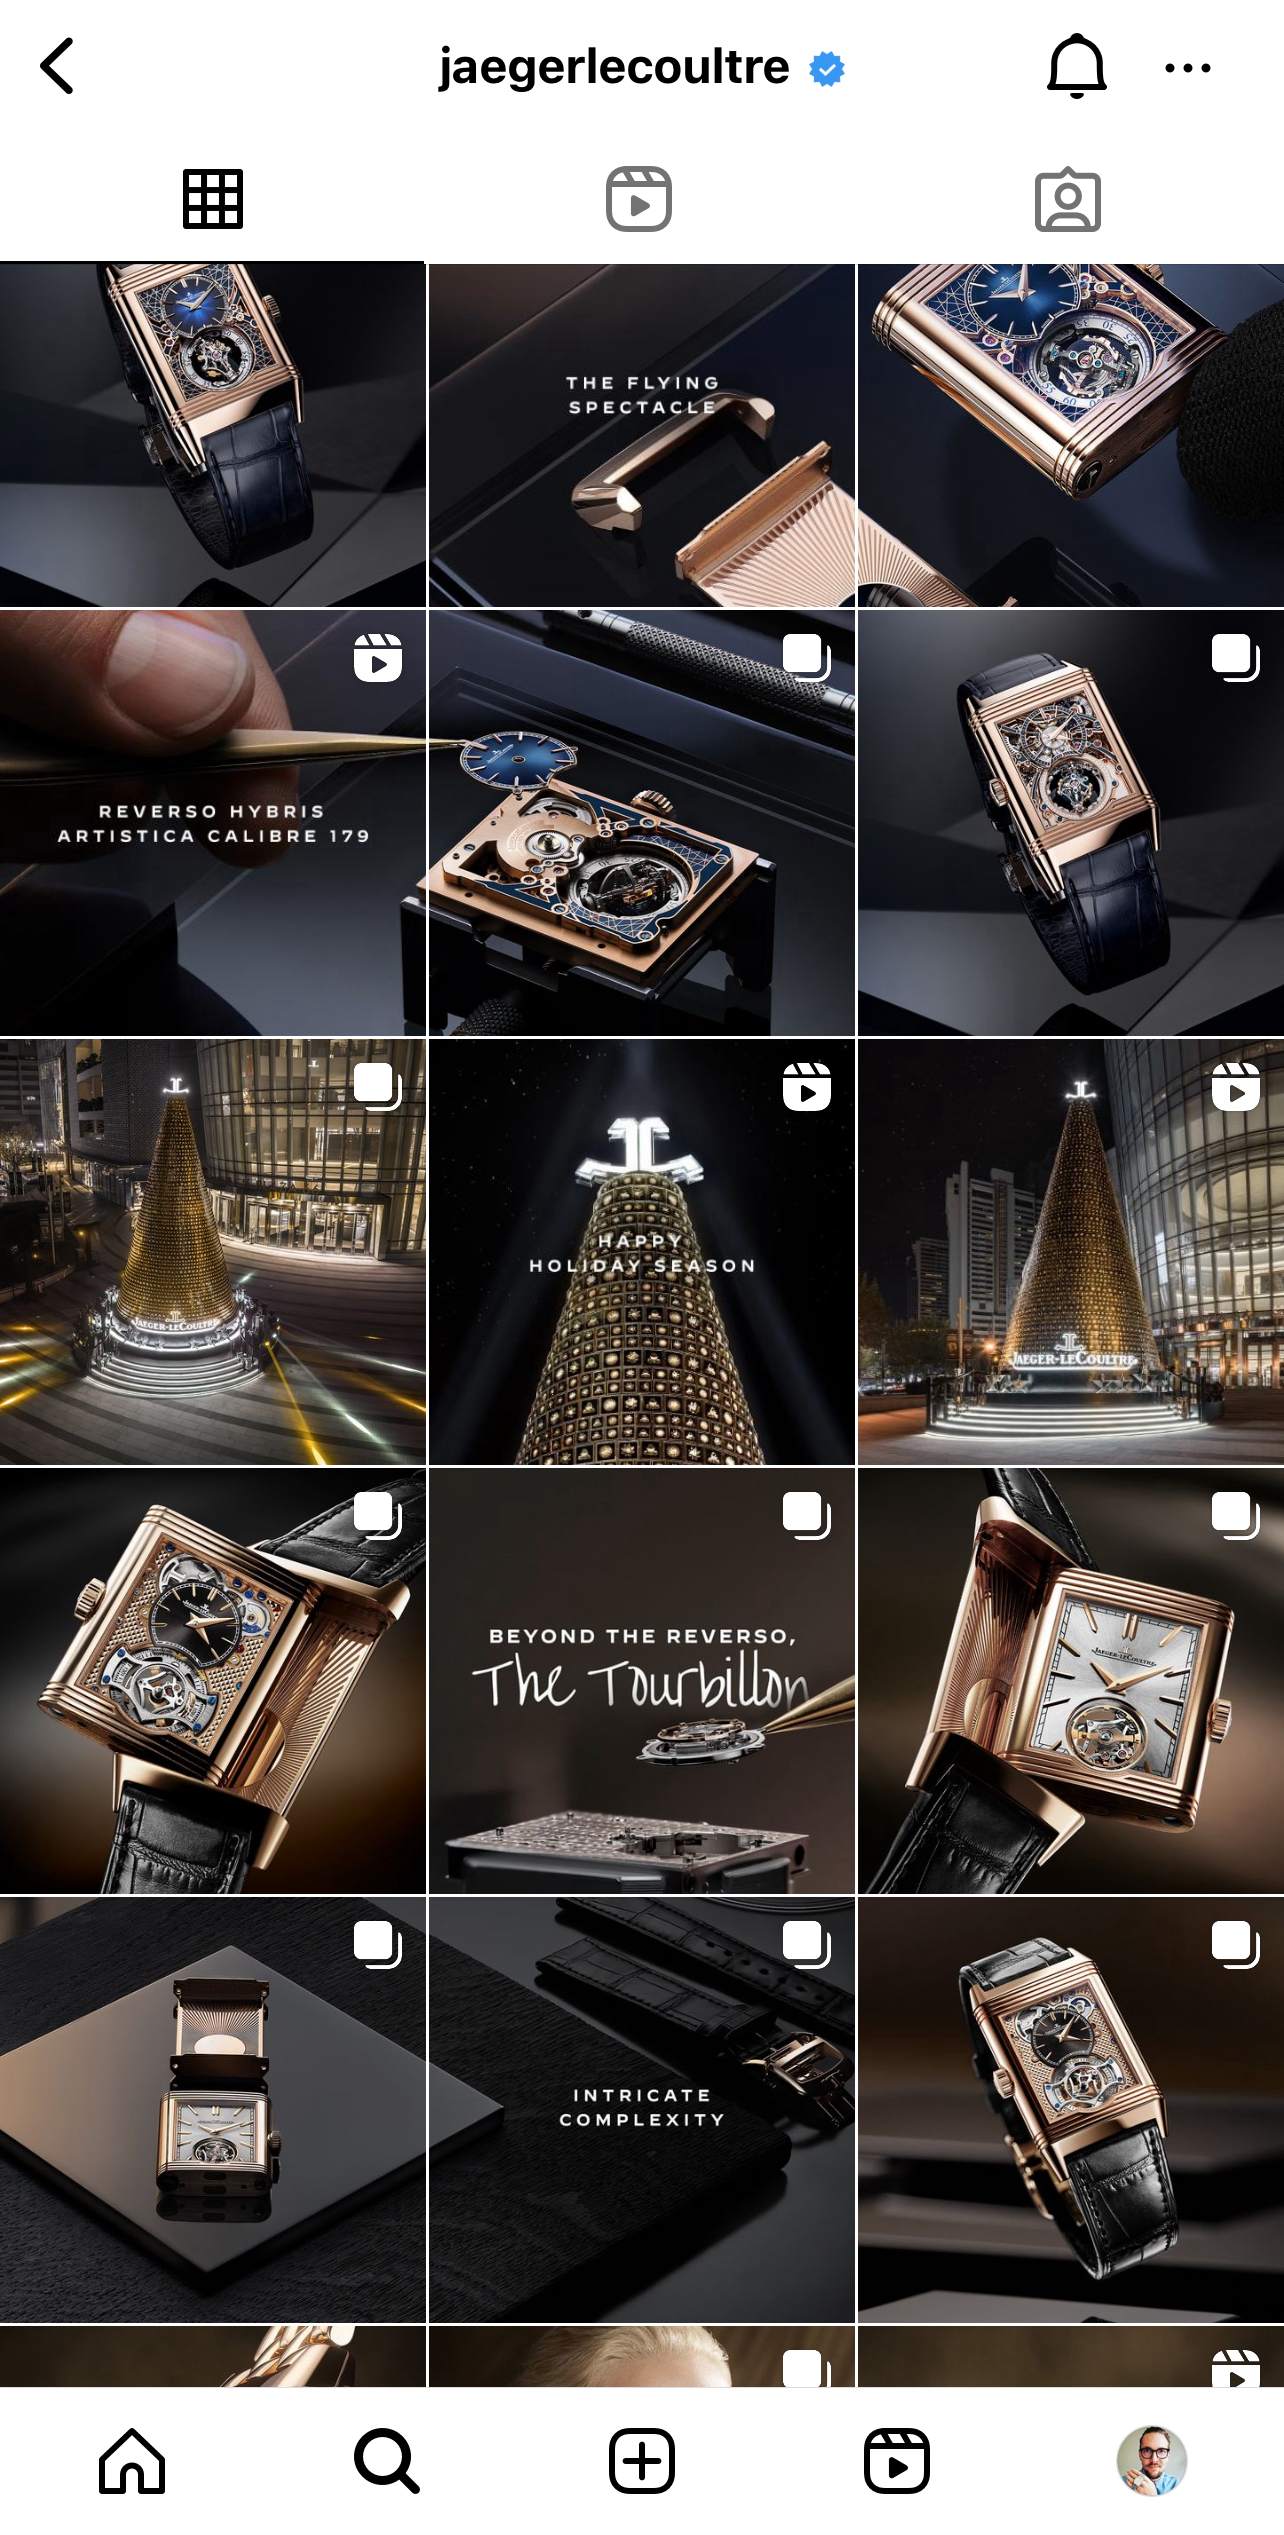 watch brands on Instagram Jaeger-LeCoultre